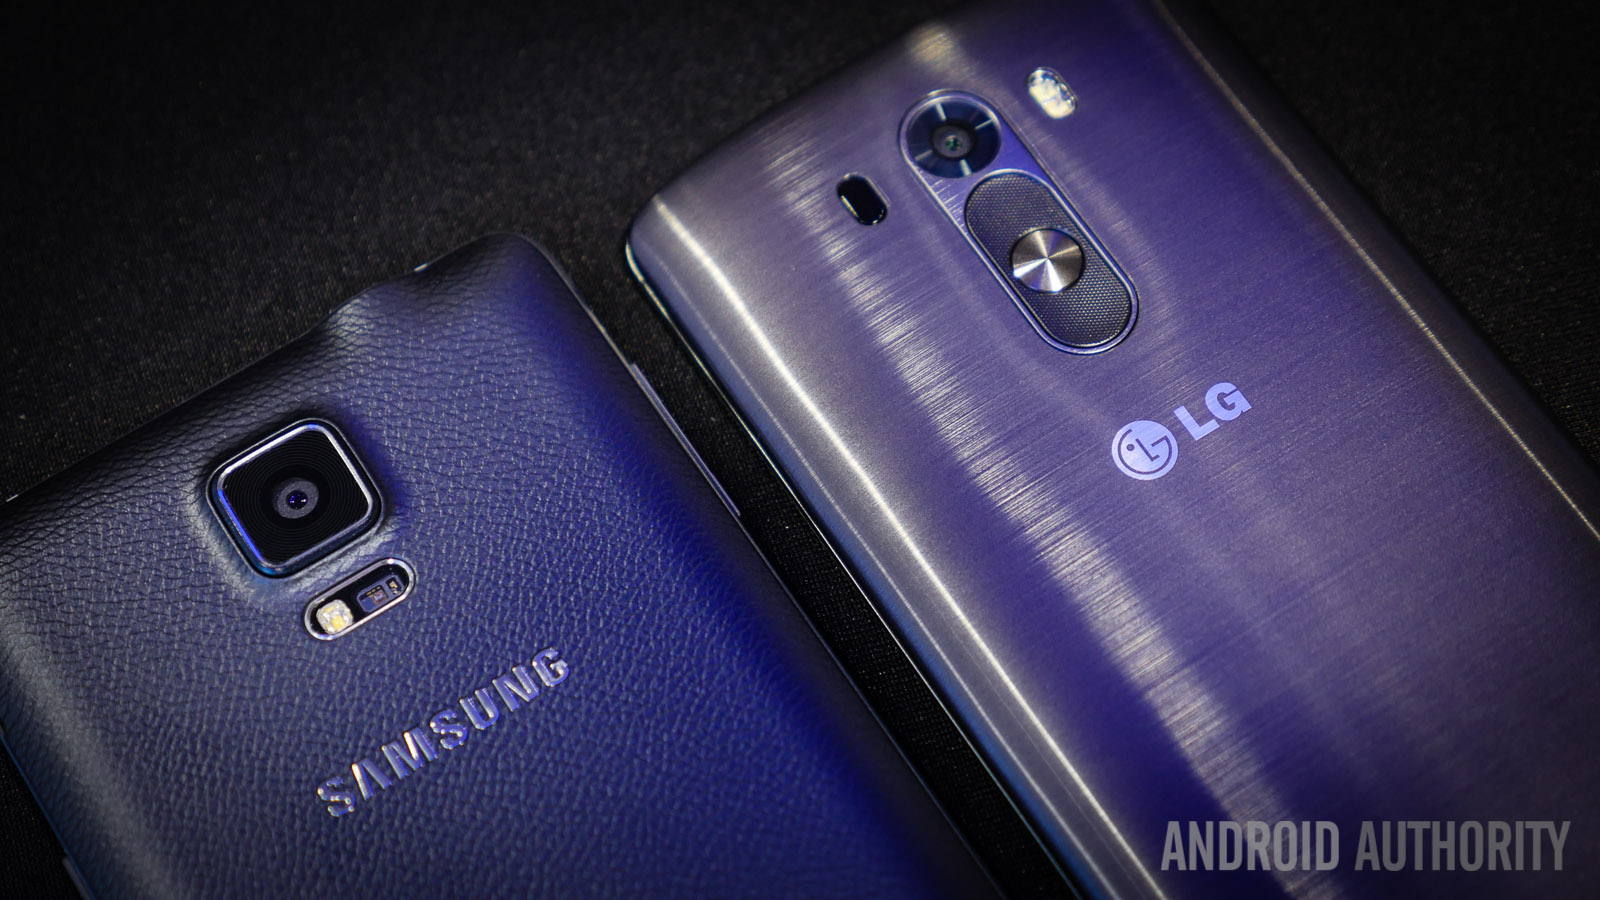 samsung galaxy note 4 vs lg g3 quick look aa (2 of 2)